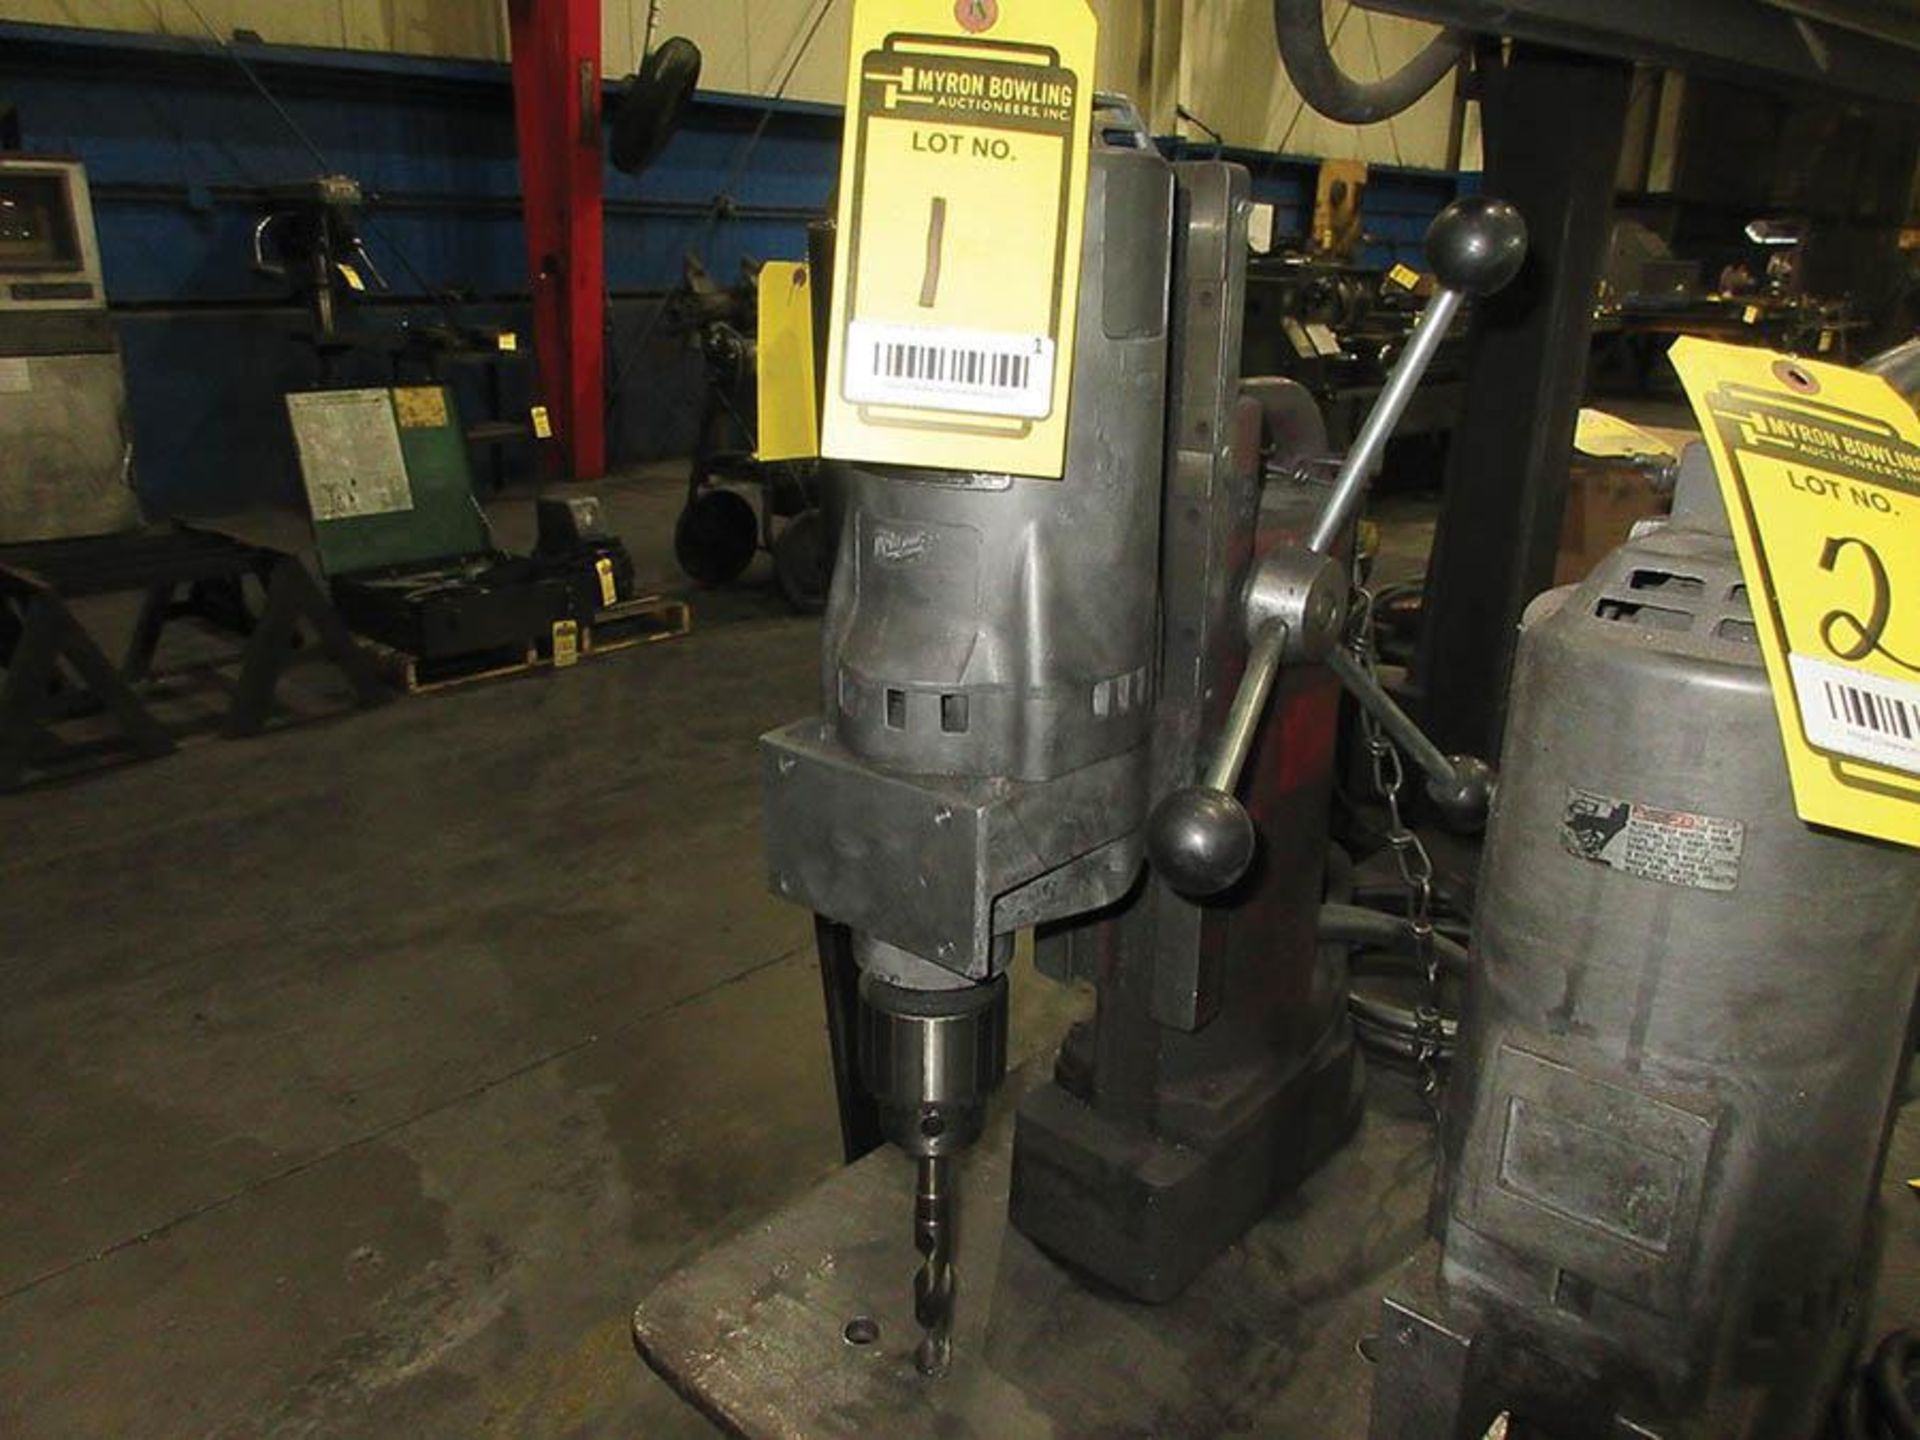 MILWAUKEE ELECTROMAGNETIC DRILL, 3/4'', 120 V., #4262-1 - Image 2 of 2